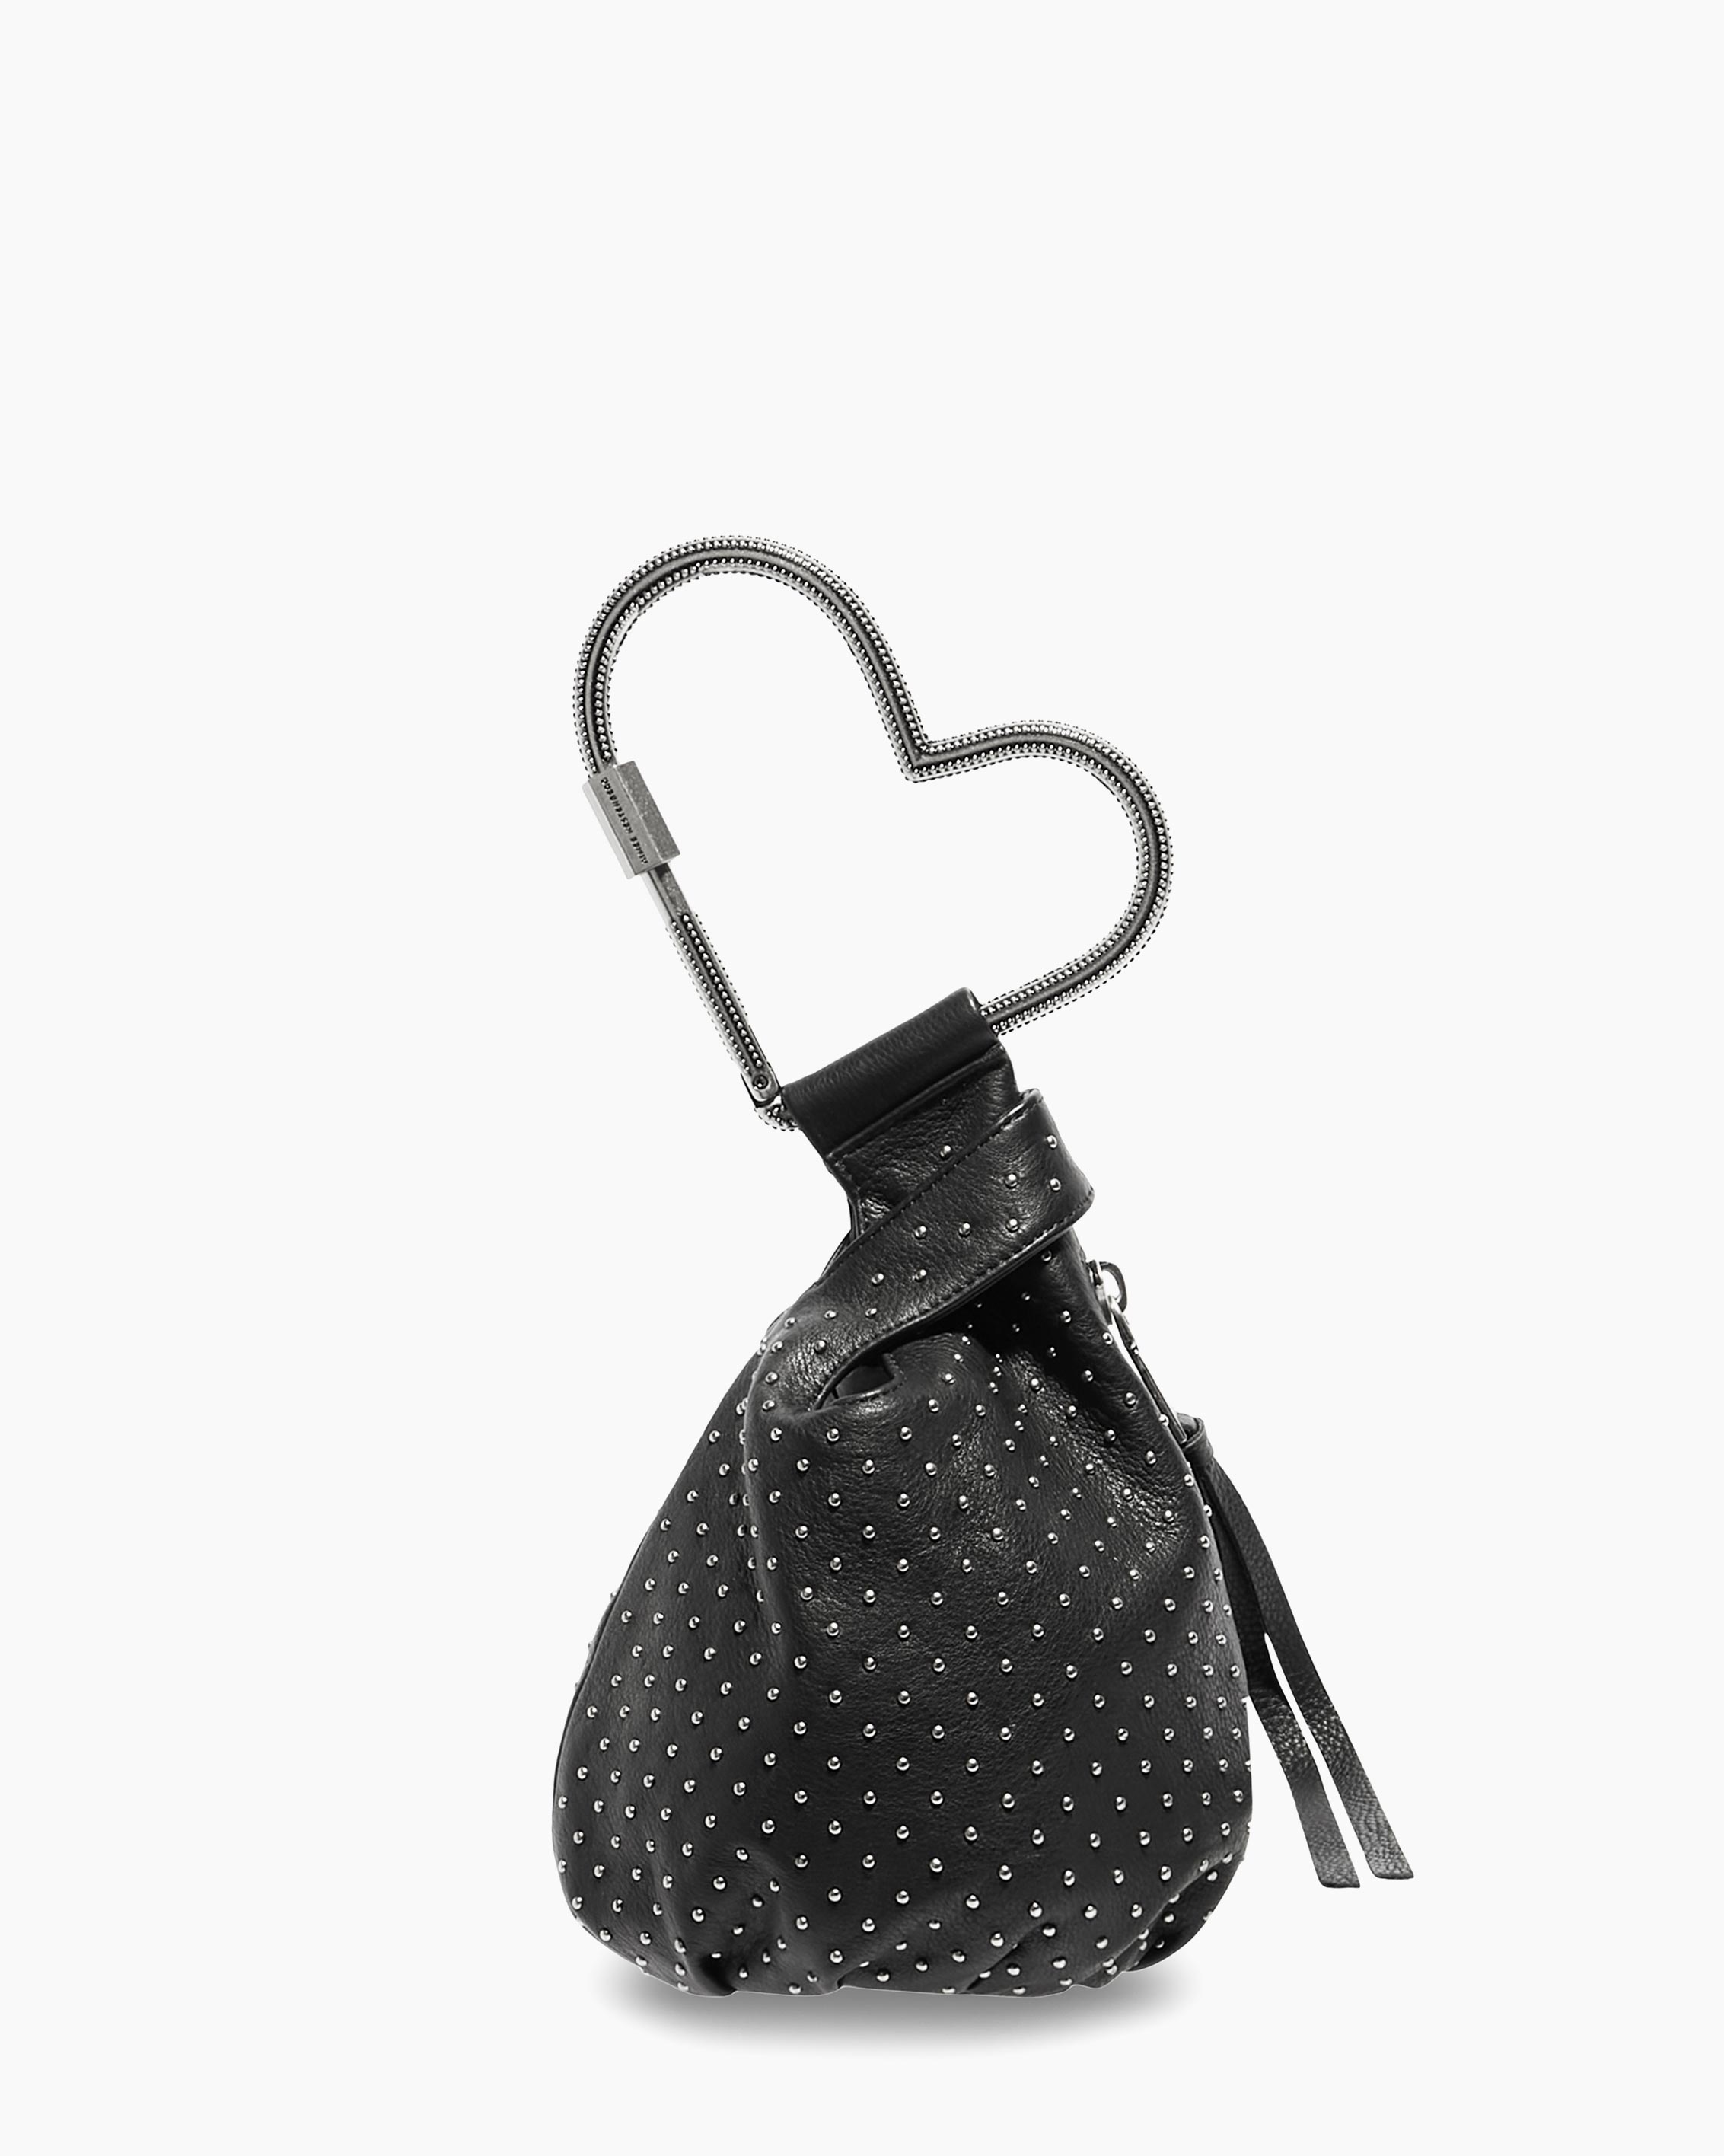 All My Heart Black with Silver Studs Pouch